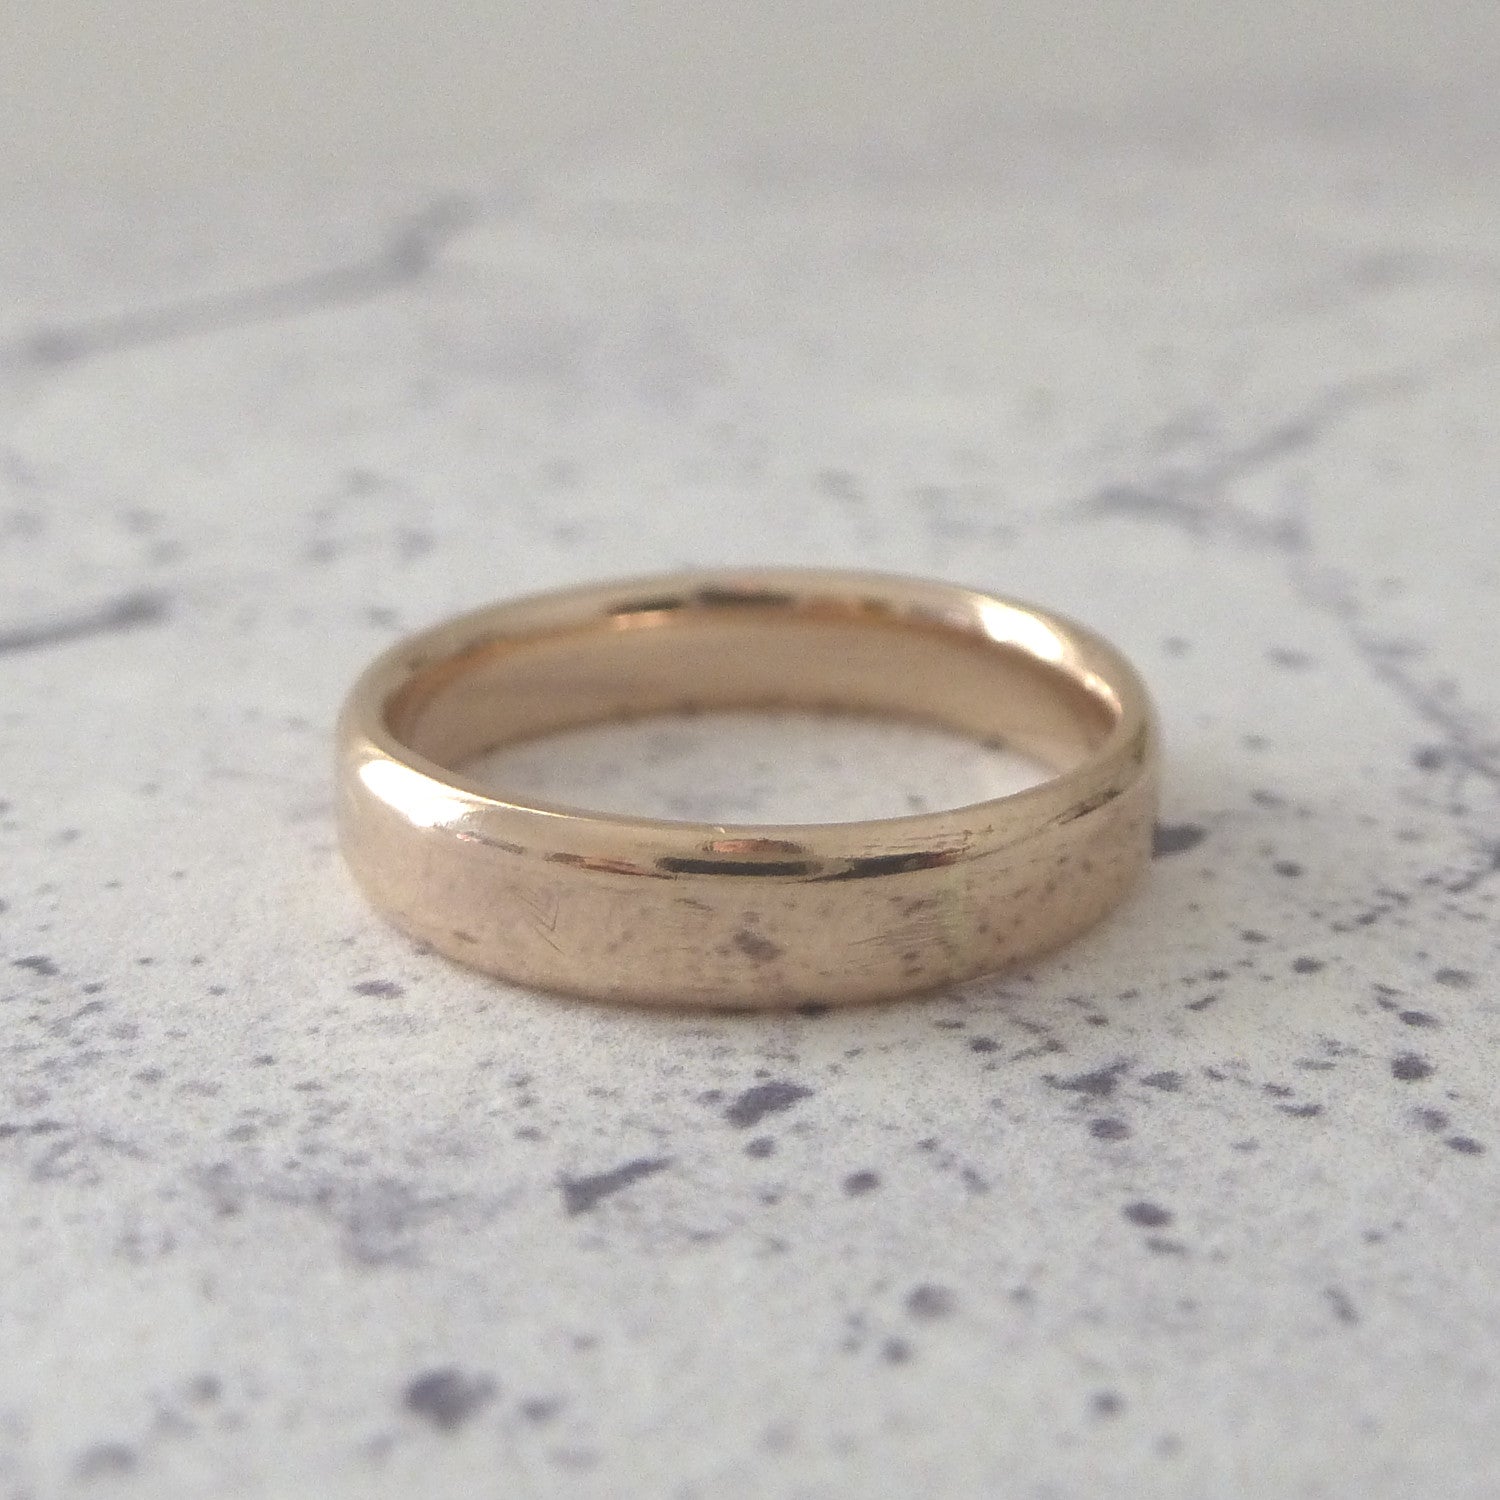 recycled 9ct rose gold wedding band, 4mm, smooth finish